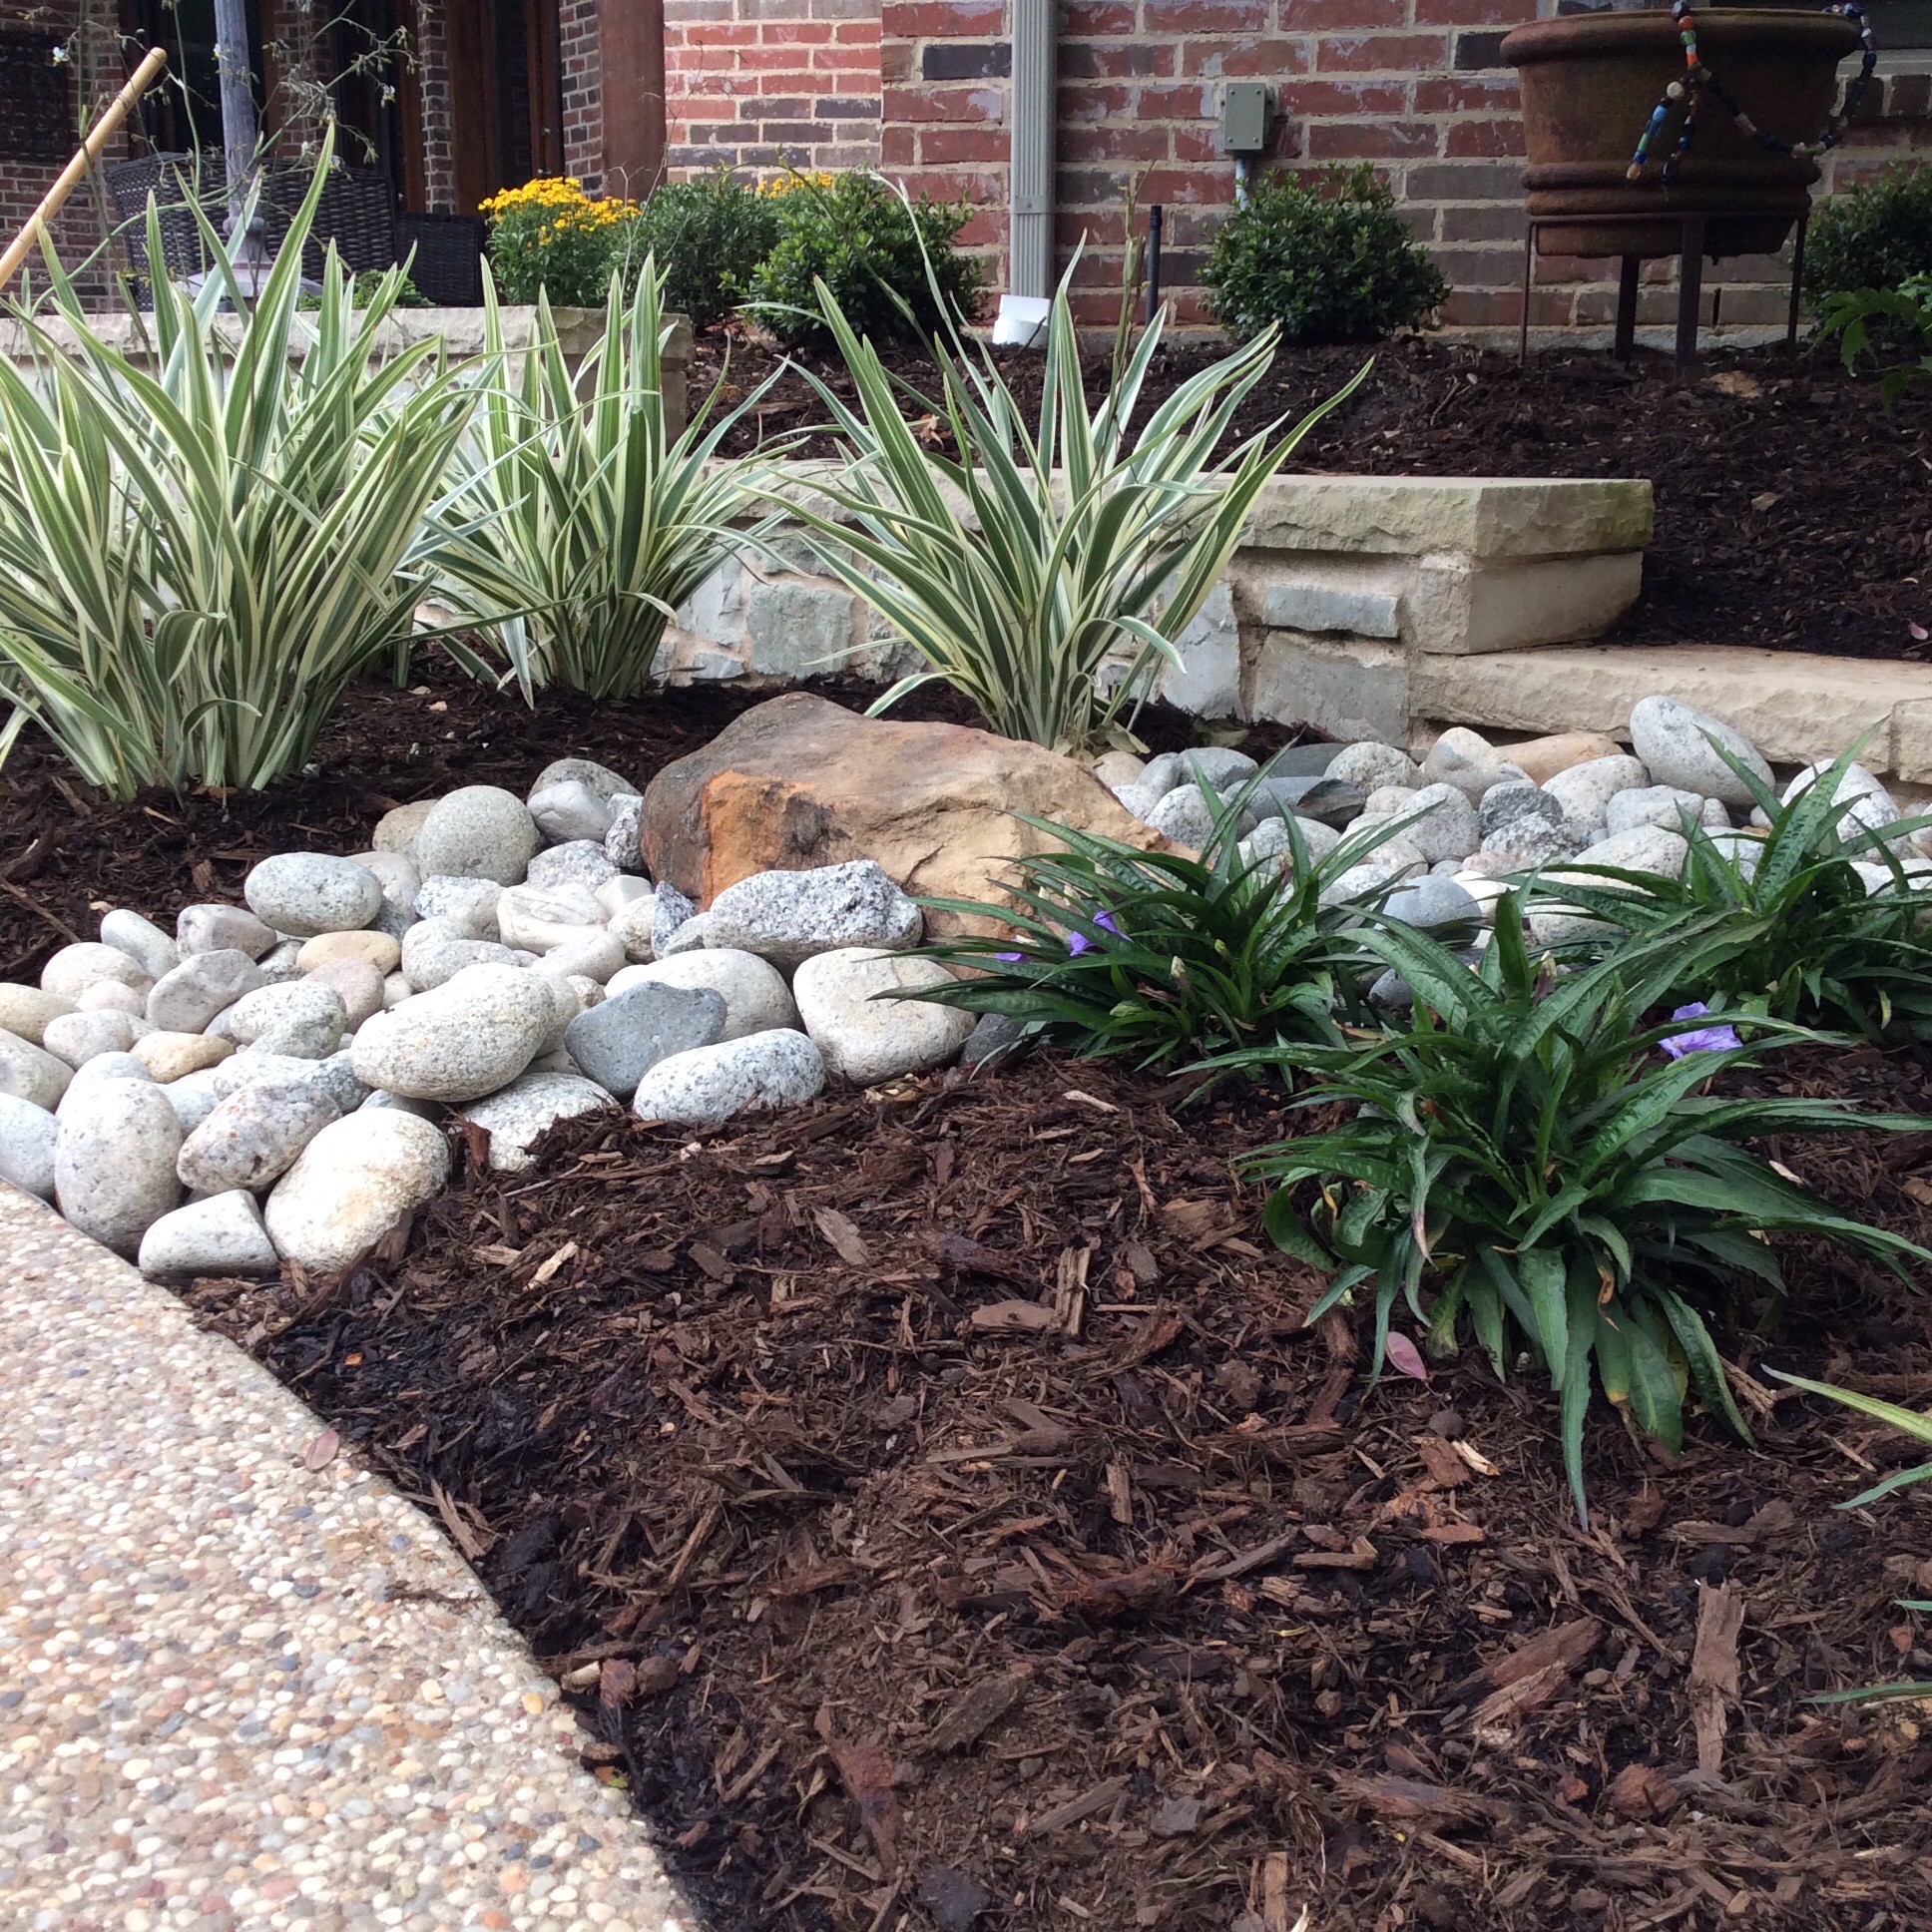 Install Landscape Fabric Under Rocks, How To Lay Large Rocks For Landscaping